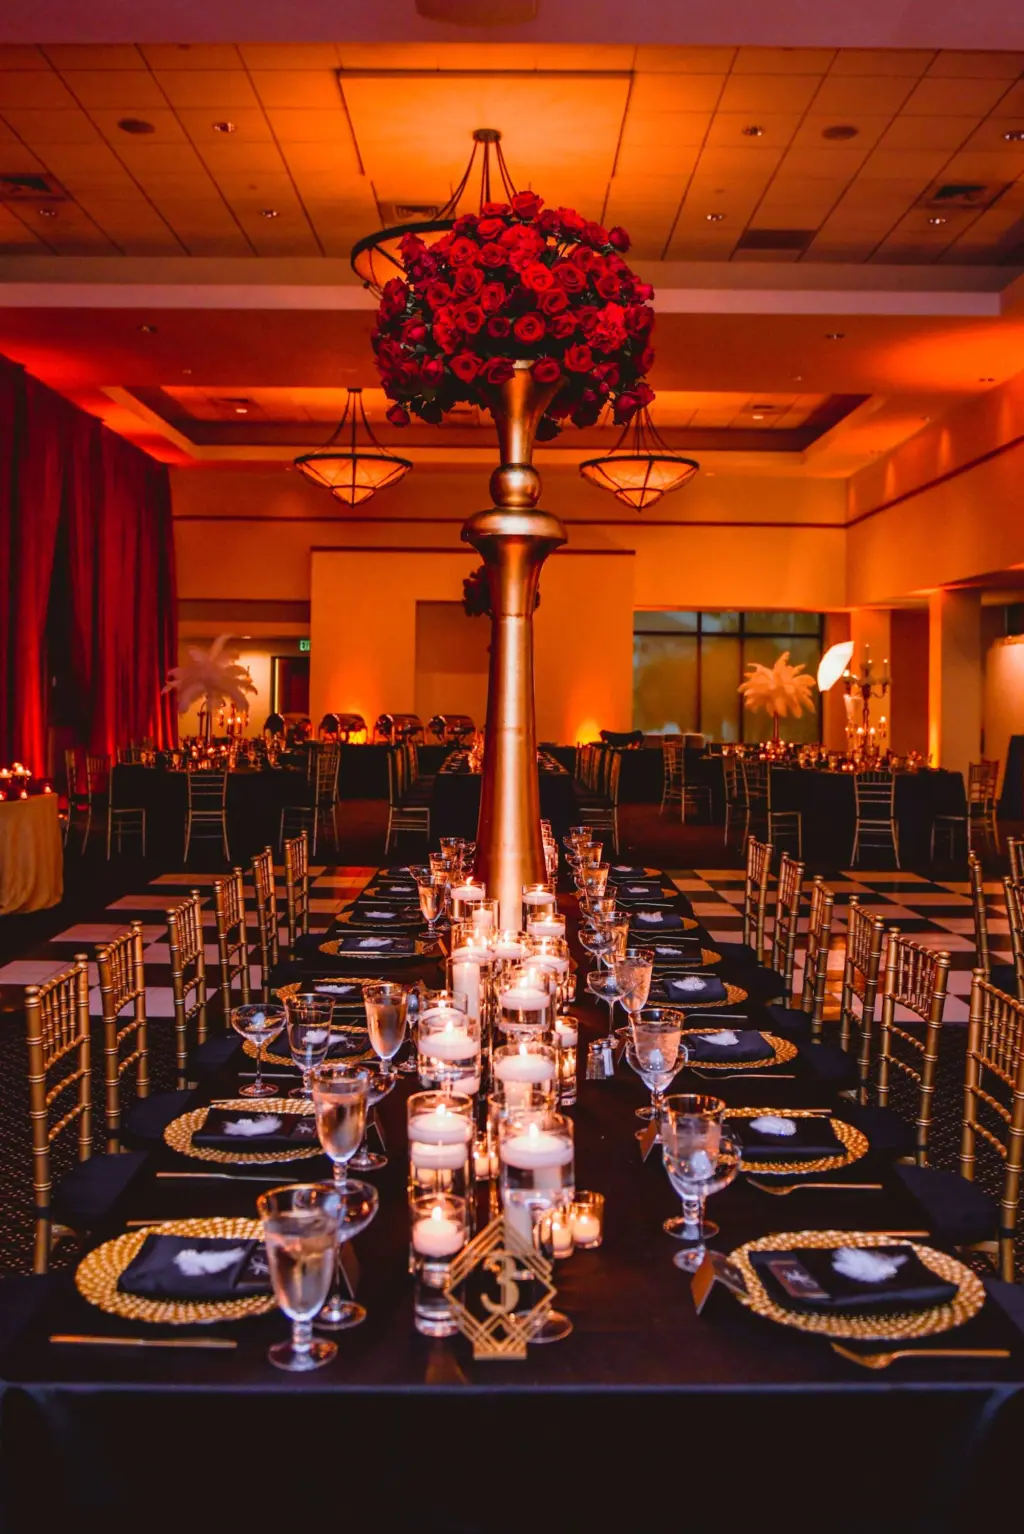 Gold Vintage Centerpiece with Red Roses and Floating Candles Tablescape Wedding Reception Inspiration | Gold Chiavari Chairs and Chargers from Tampa Event Rental Company A Chair Affair